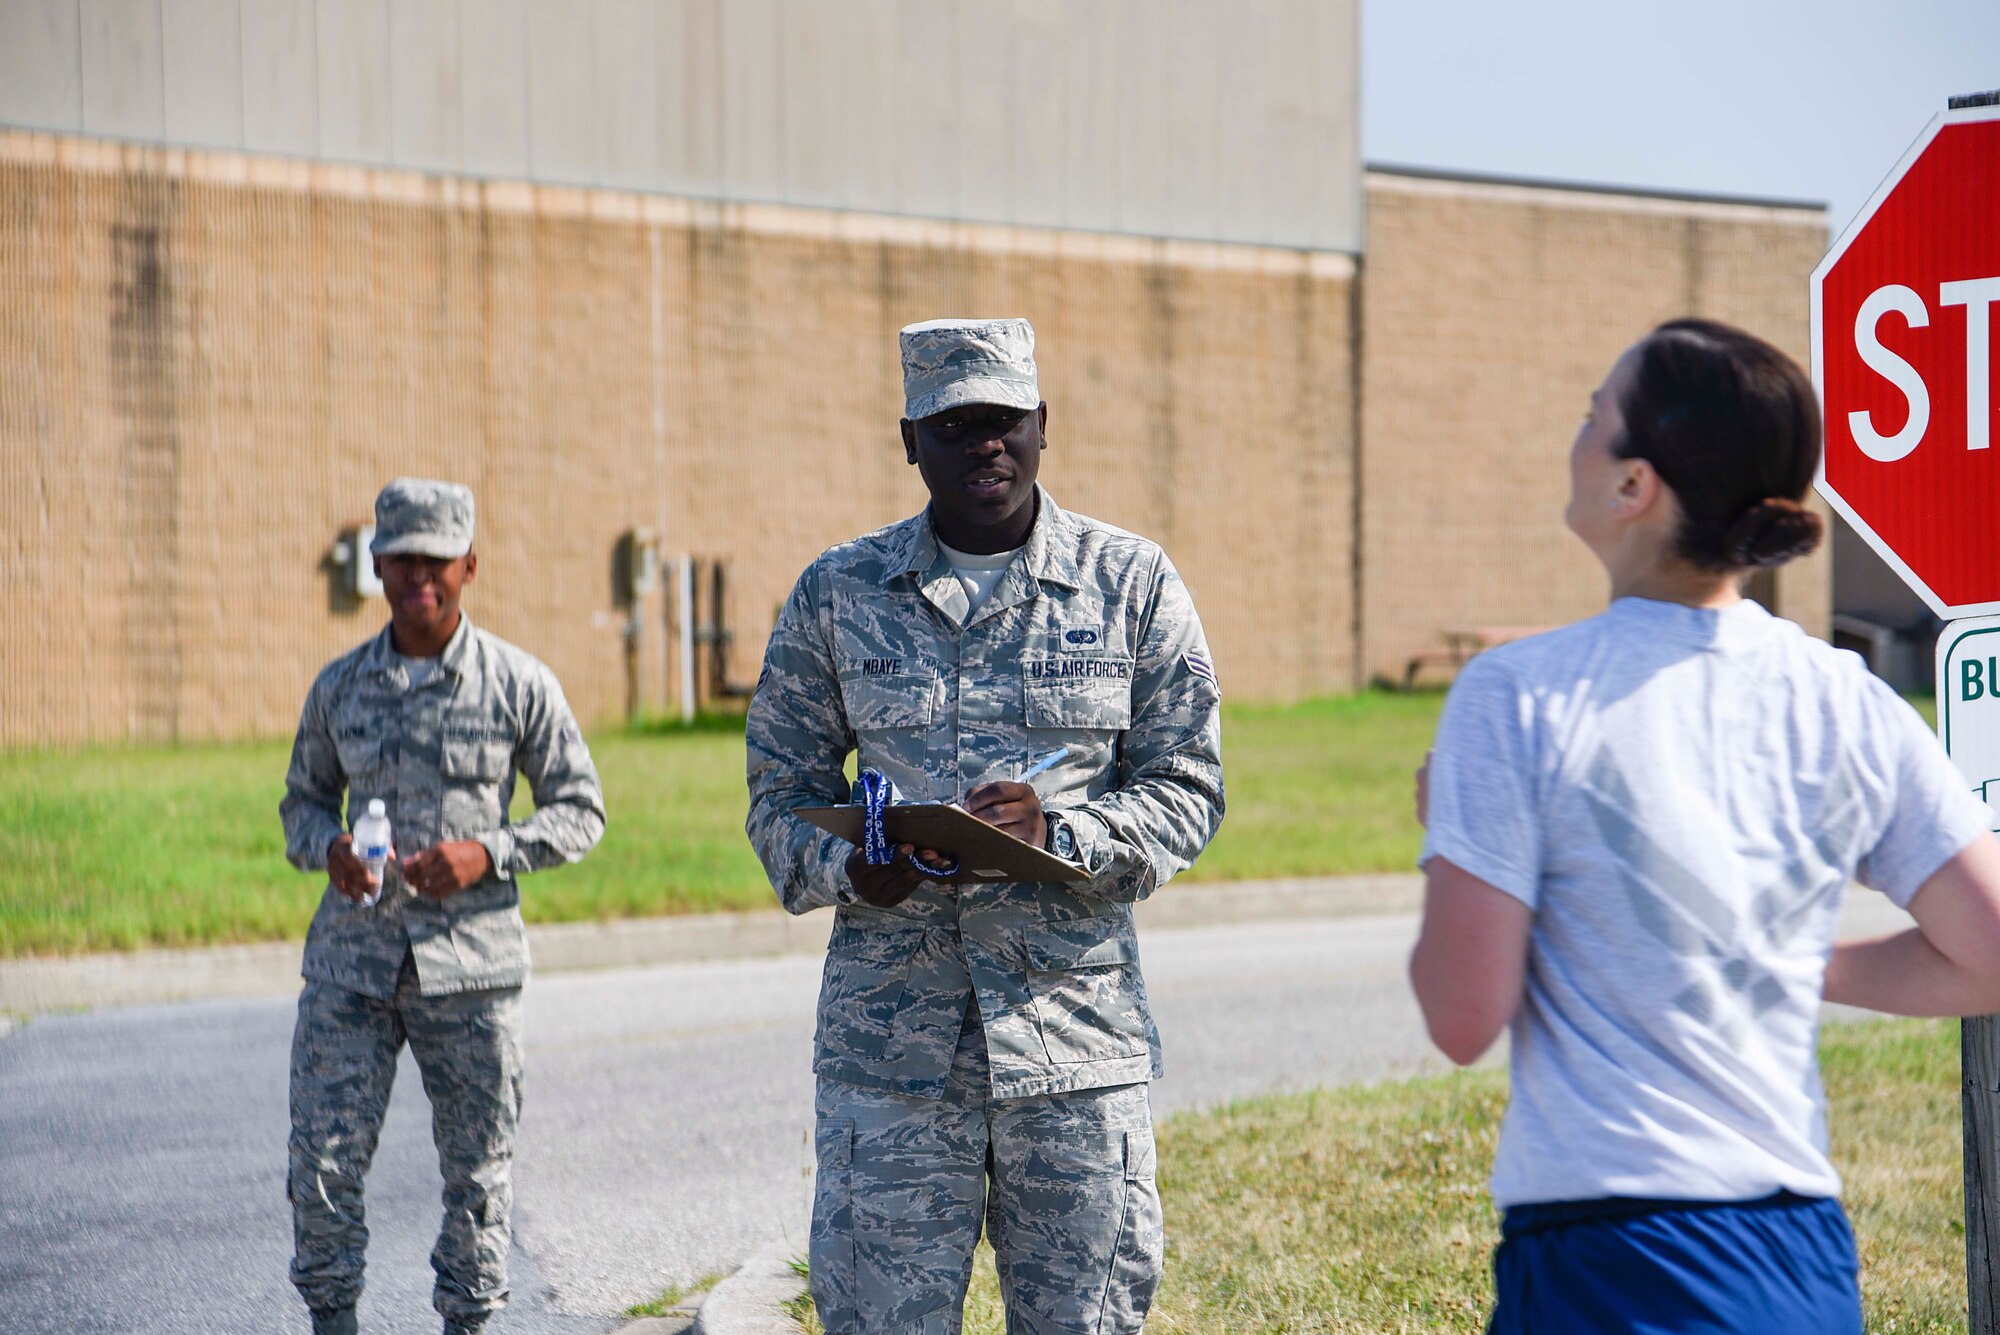 Airman 1st Class Ousseynou Mbaye, a base support specialist assigned to the 175th Force Support Squadron, Maryland Air National Guard, conducts a fitness test July 2, 2019 at Martin State Airport, Middle River, Md. Mbaye enlisted in the MDANG in October 2017 and would like to serve at least 20 years.